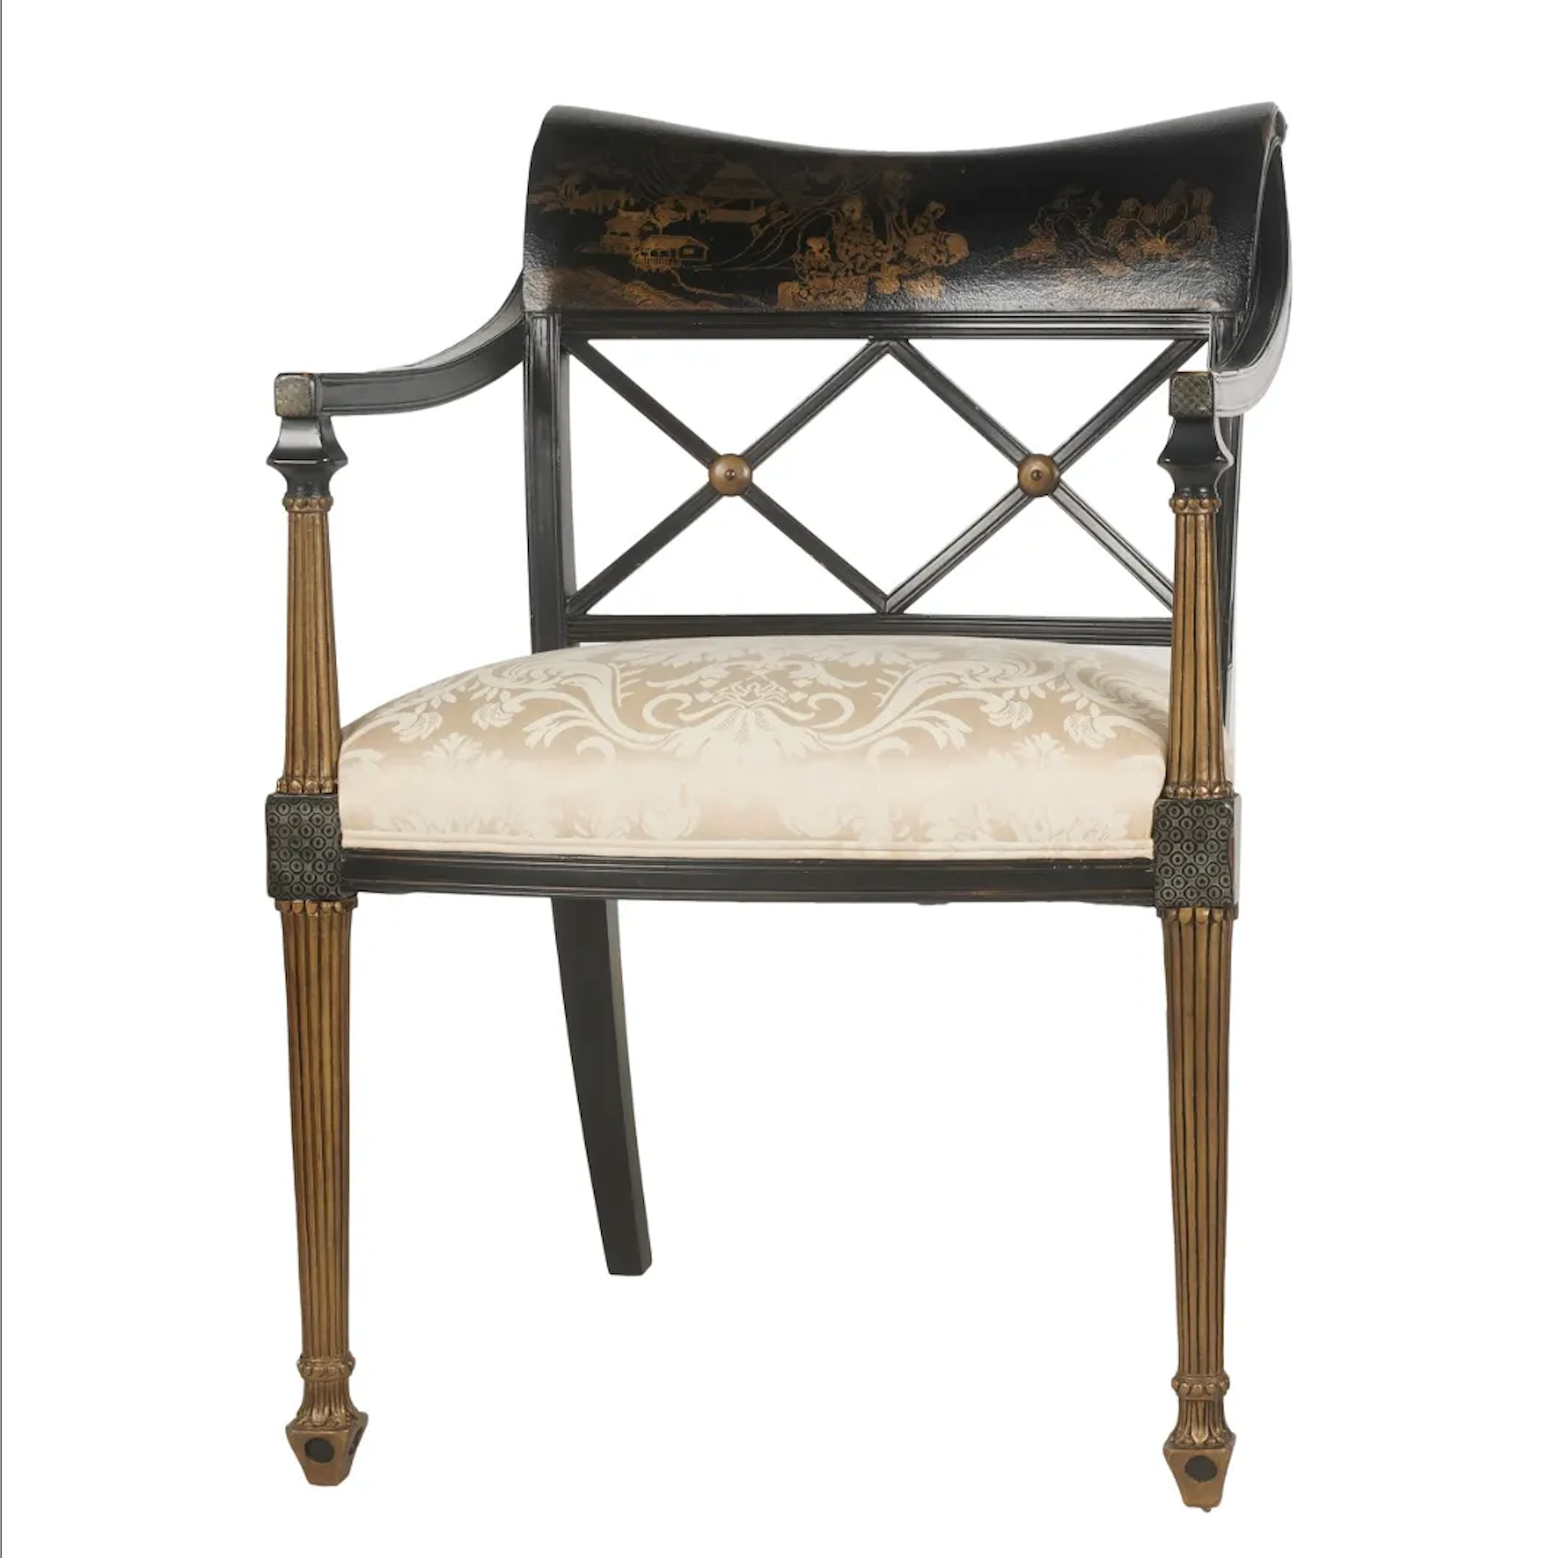 Antique English Regency Chinoiserie Arm Chair | Work of Man